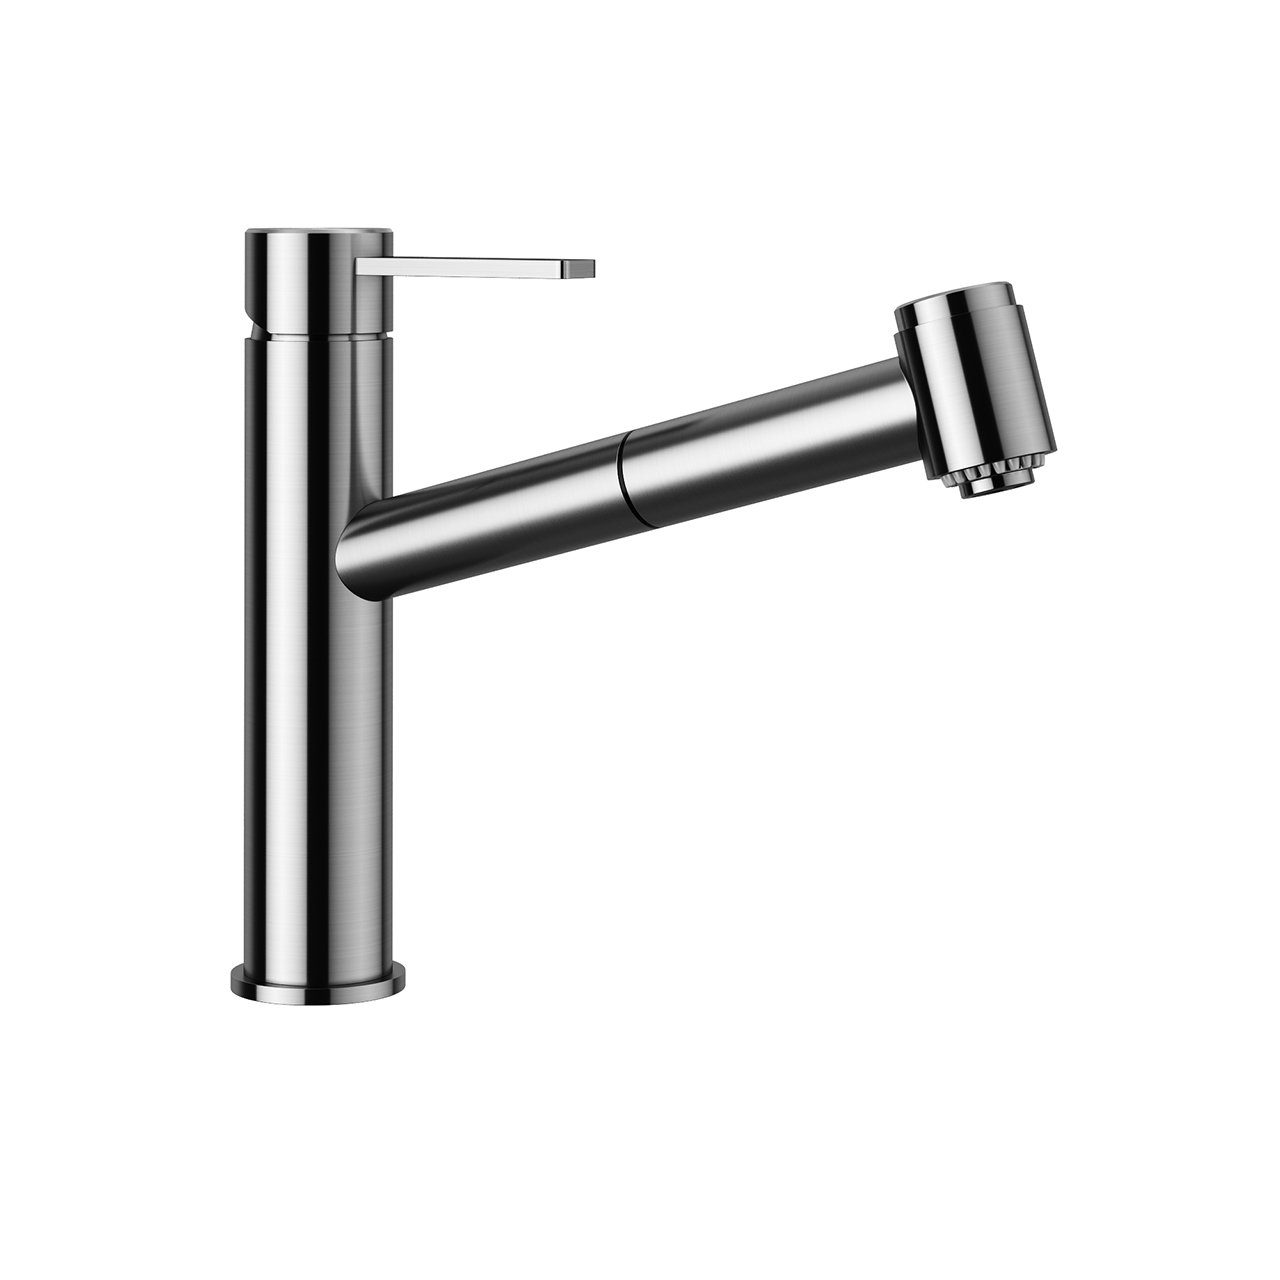 Ambis S Kitchen Faucet by Blanco